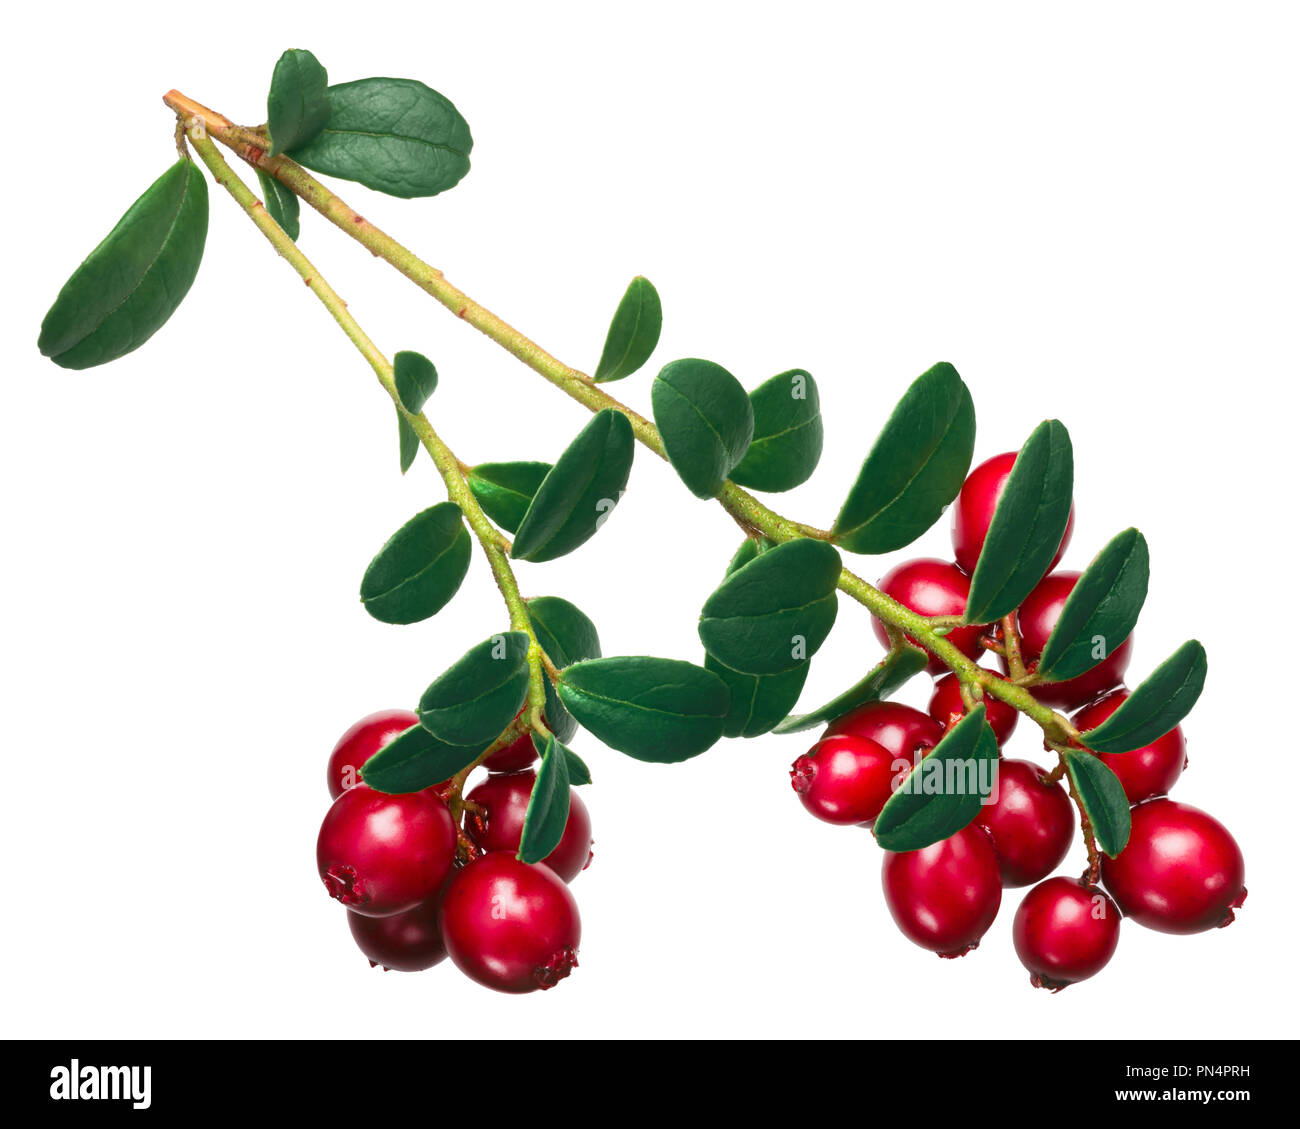 Lingonberry (fruits of Vaccinium vitis-idaea) with leaves, top view Stock Photo